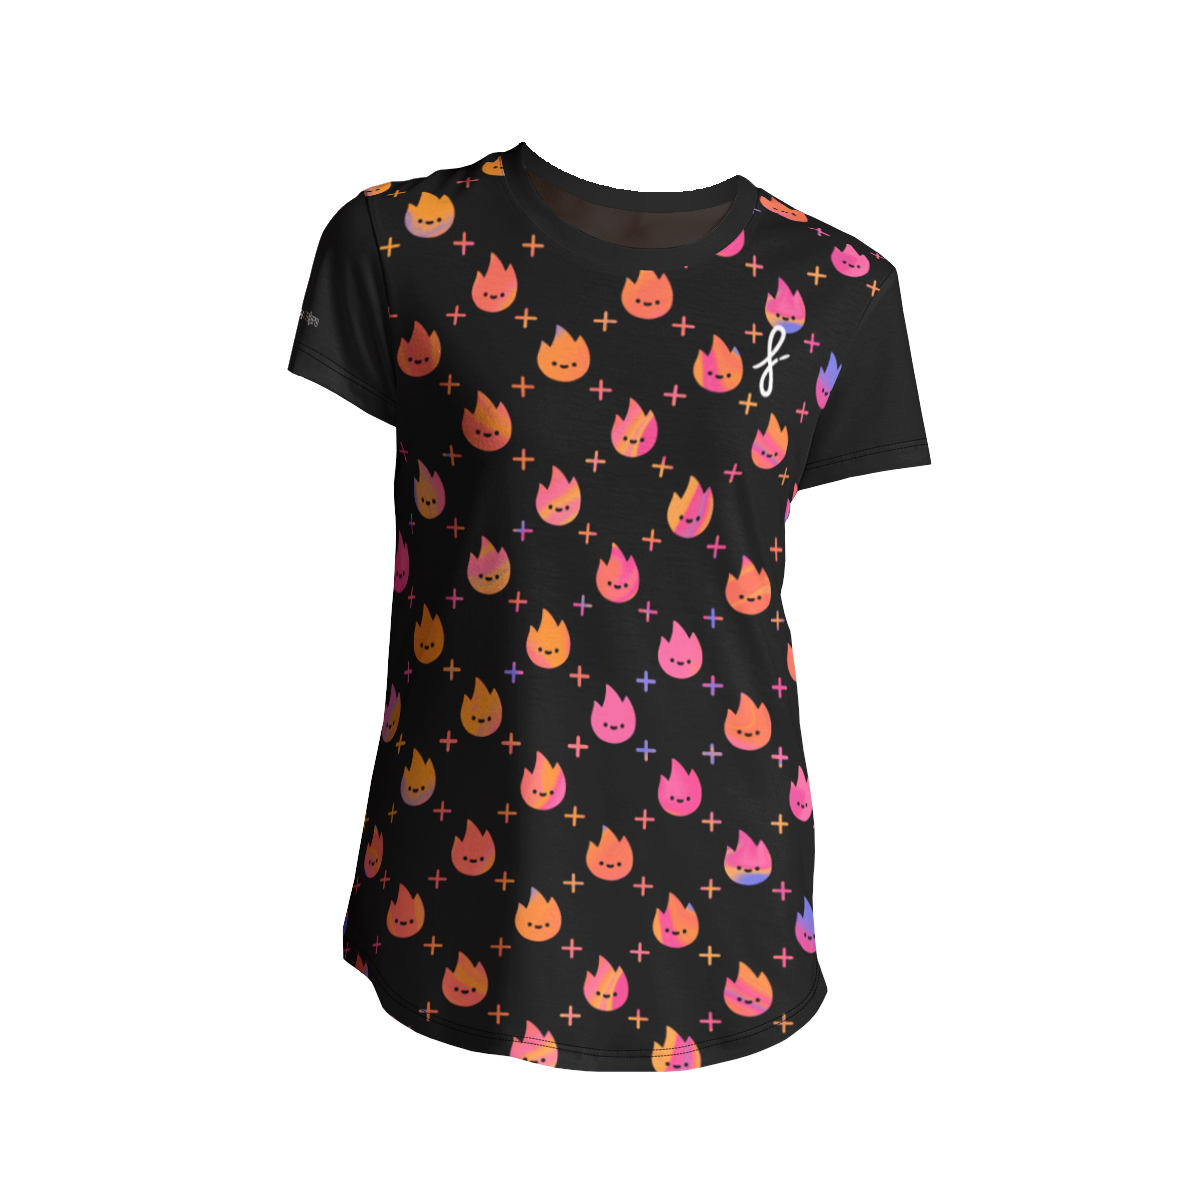 Hot Round Icon Women's SolPro Jersey